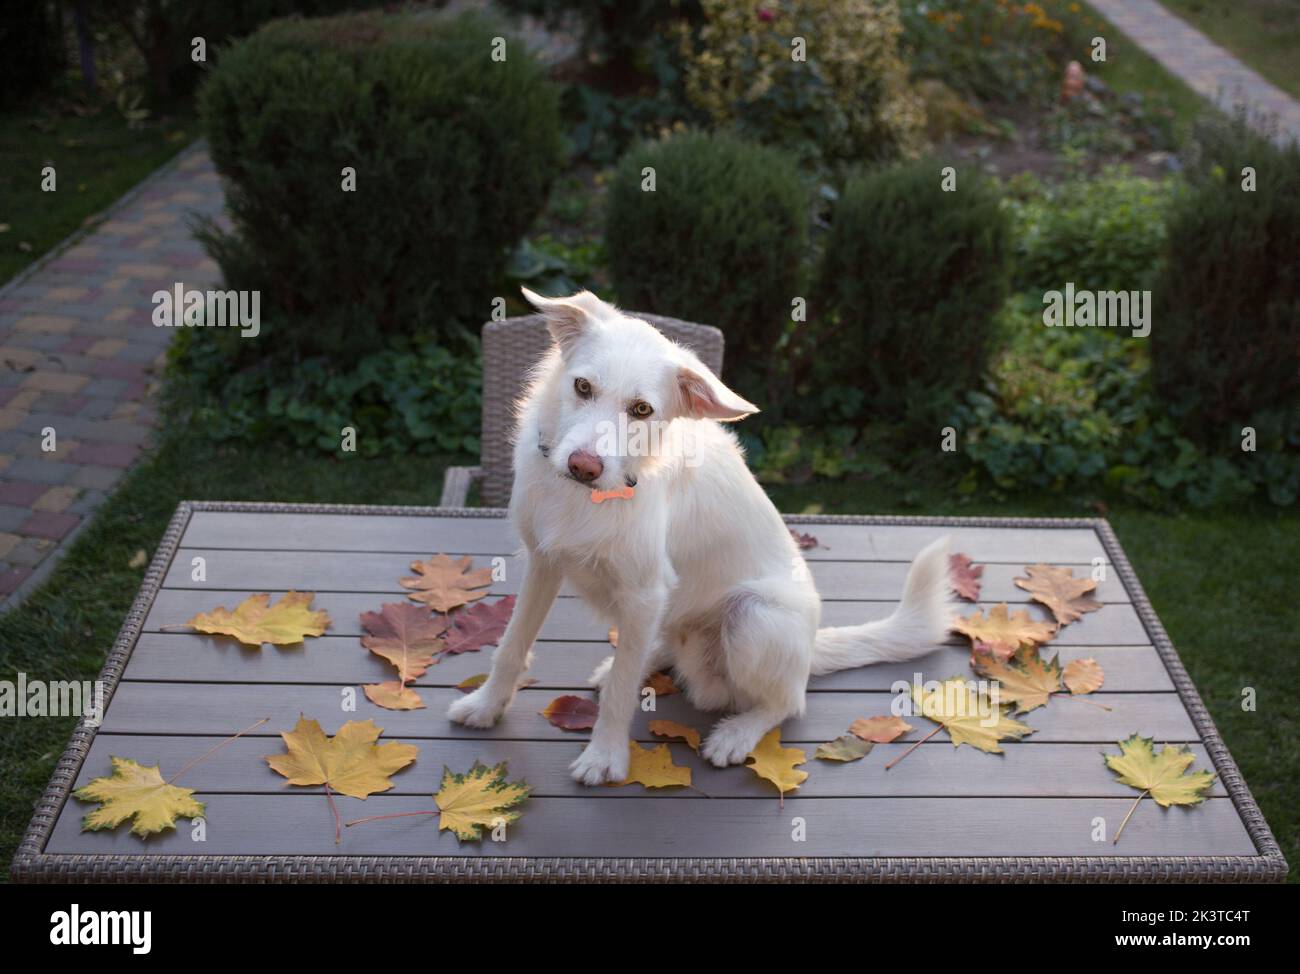 collection of fallen autumn leaves laid out on the table. funny naughty white dog sits on the table. Autumn mood. Curious pet. positive autumn day Stock Photo